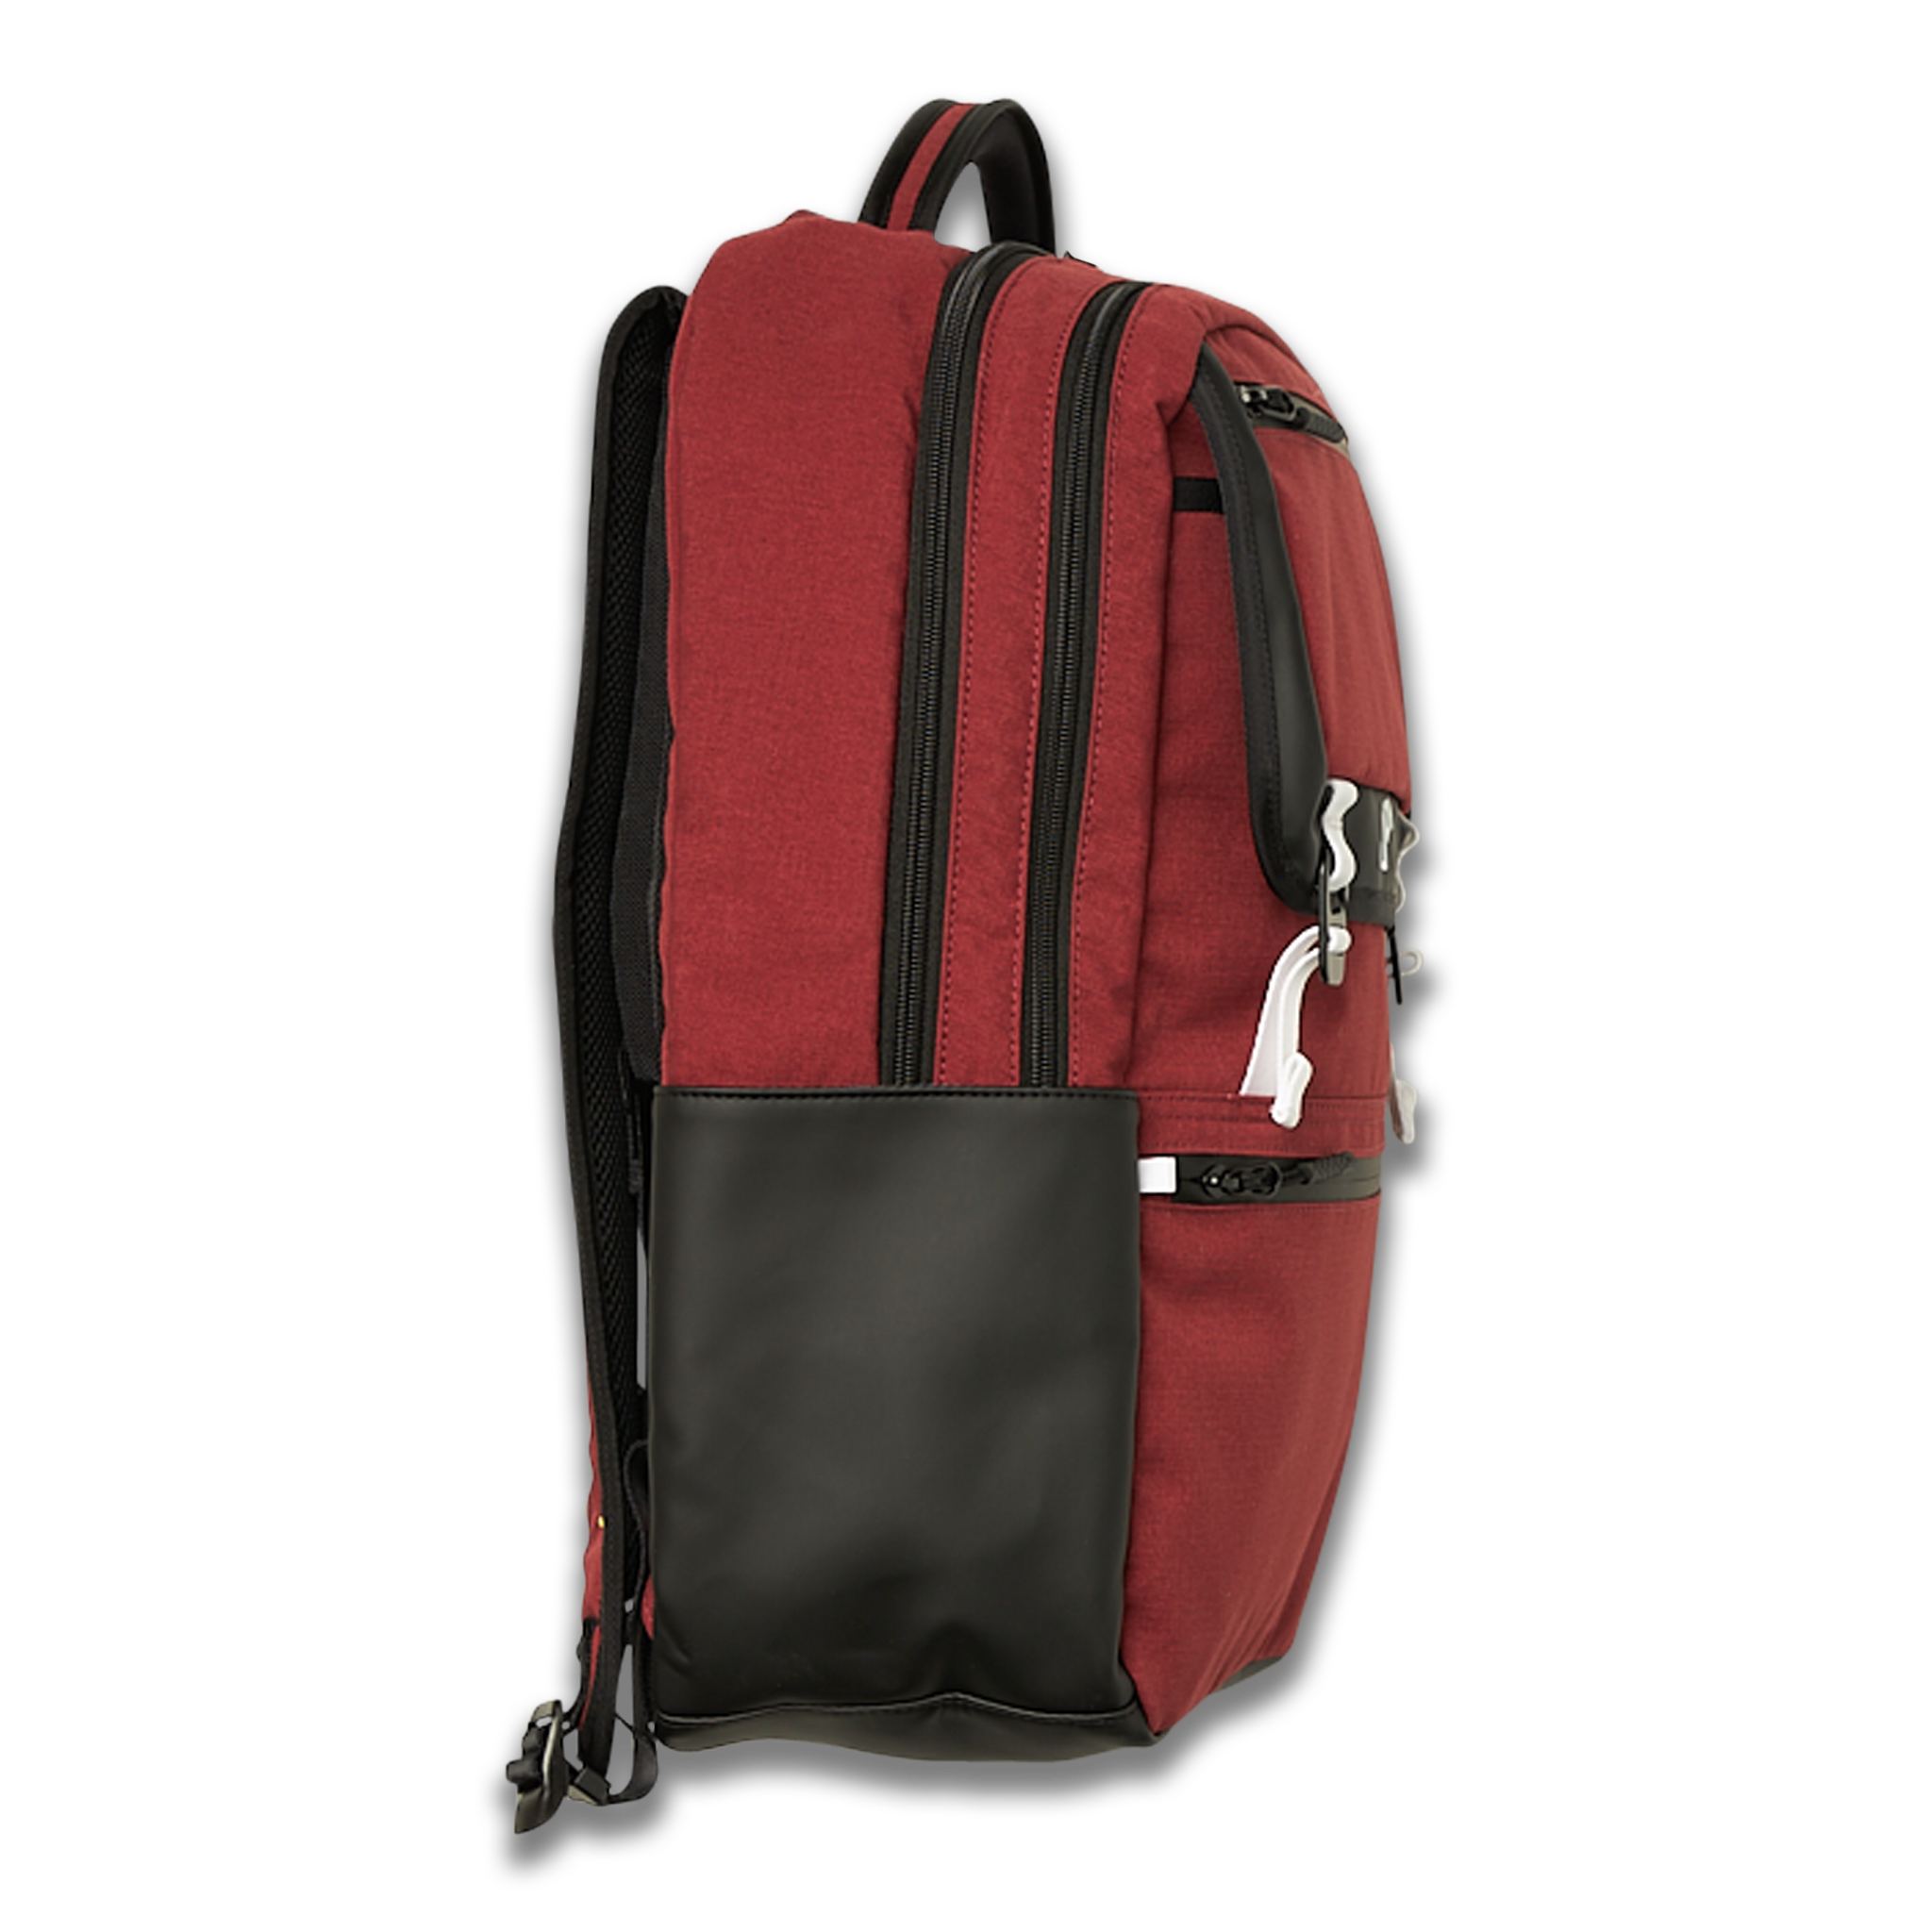 Jones Sports Co. A2 Backpack - Sonoma